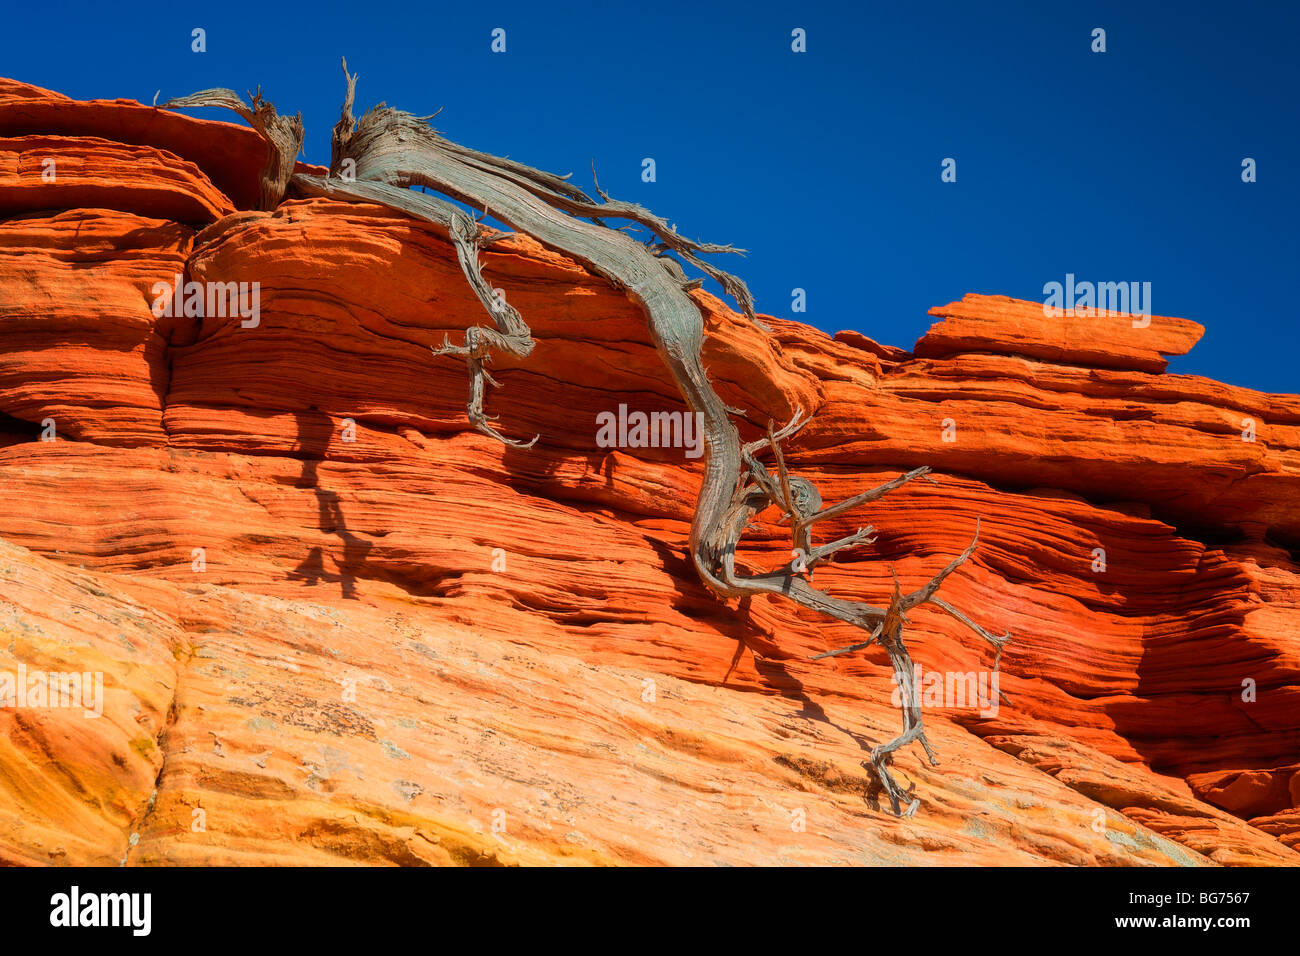 Dead juniper contrasted against a sandstone wall in Vermilion Cliffs National Monument Stock Photo